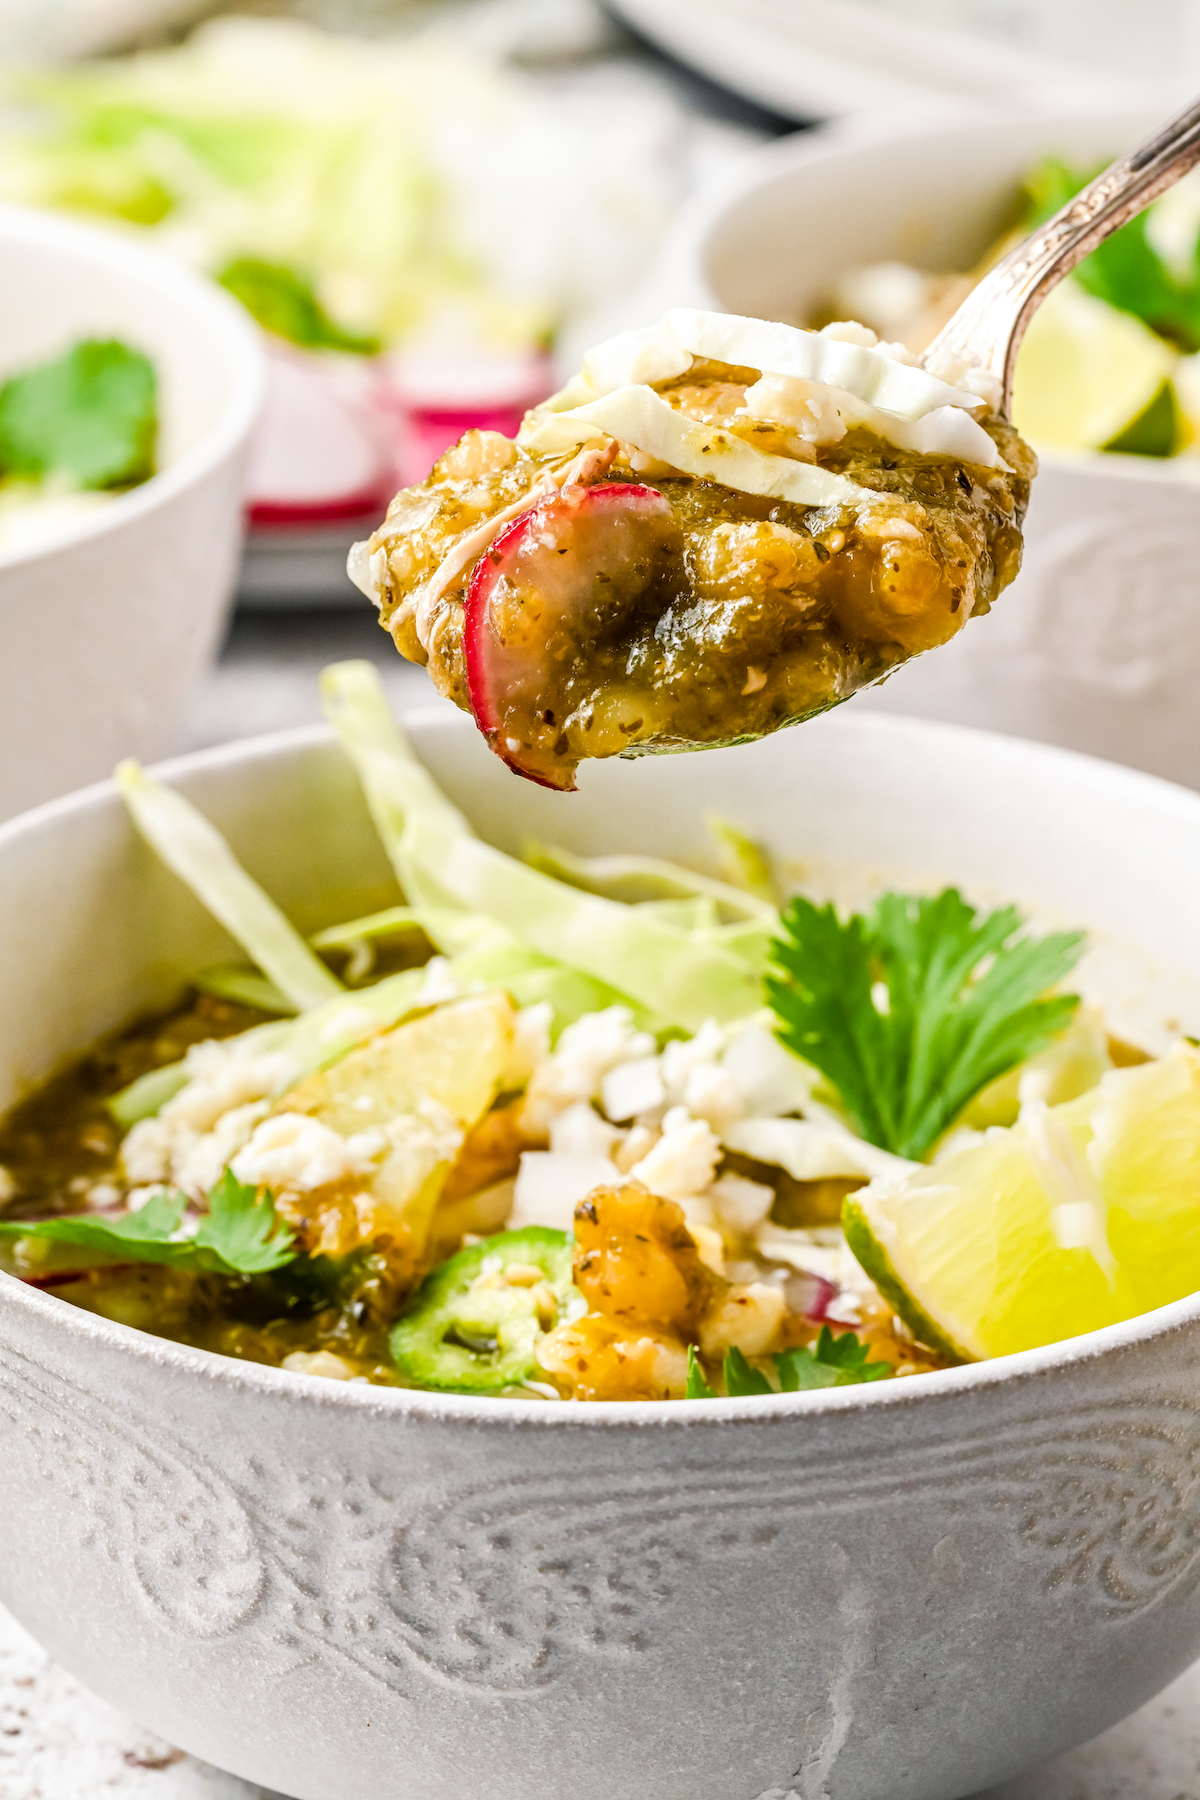 Spoonful of Mexican pozole.